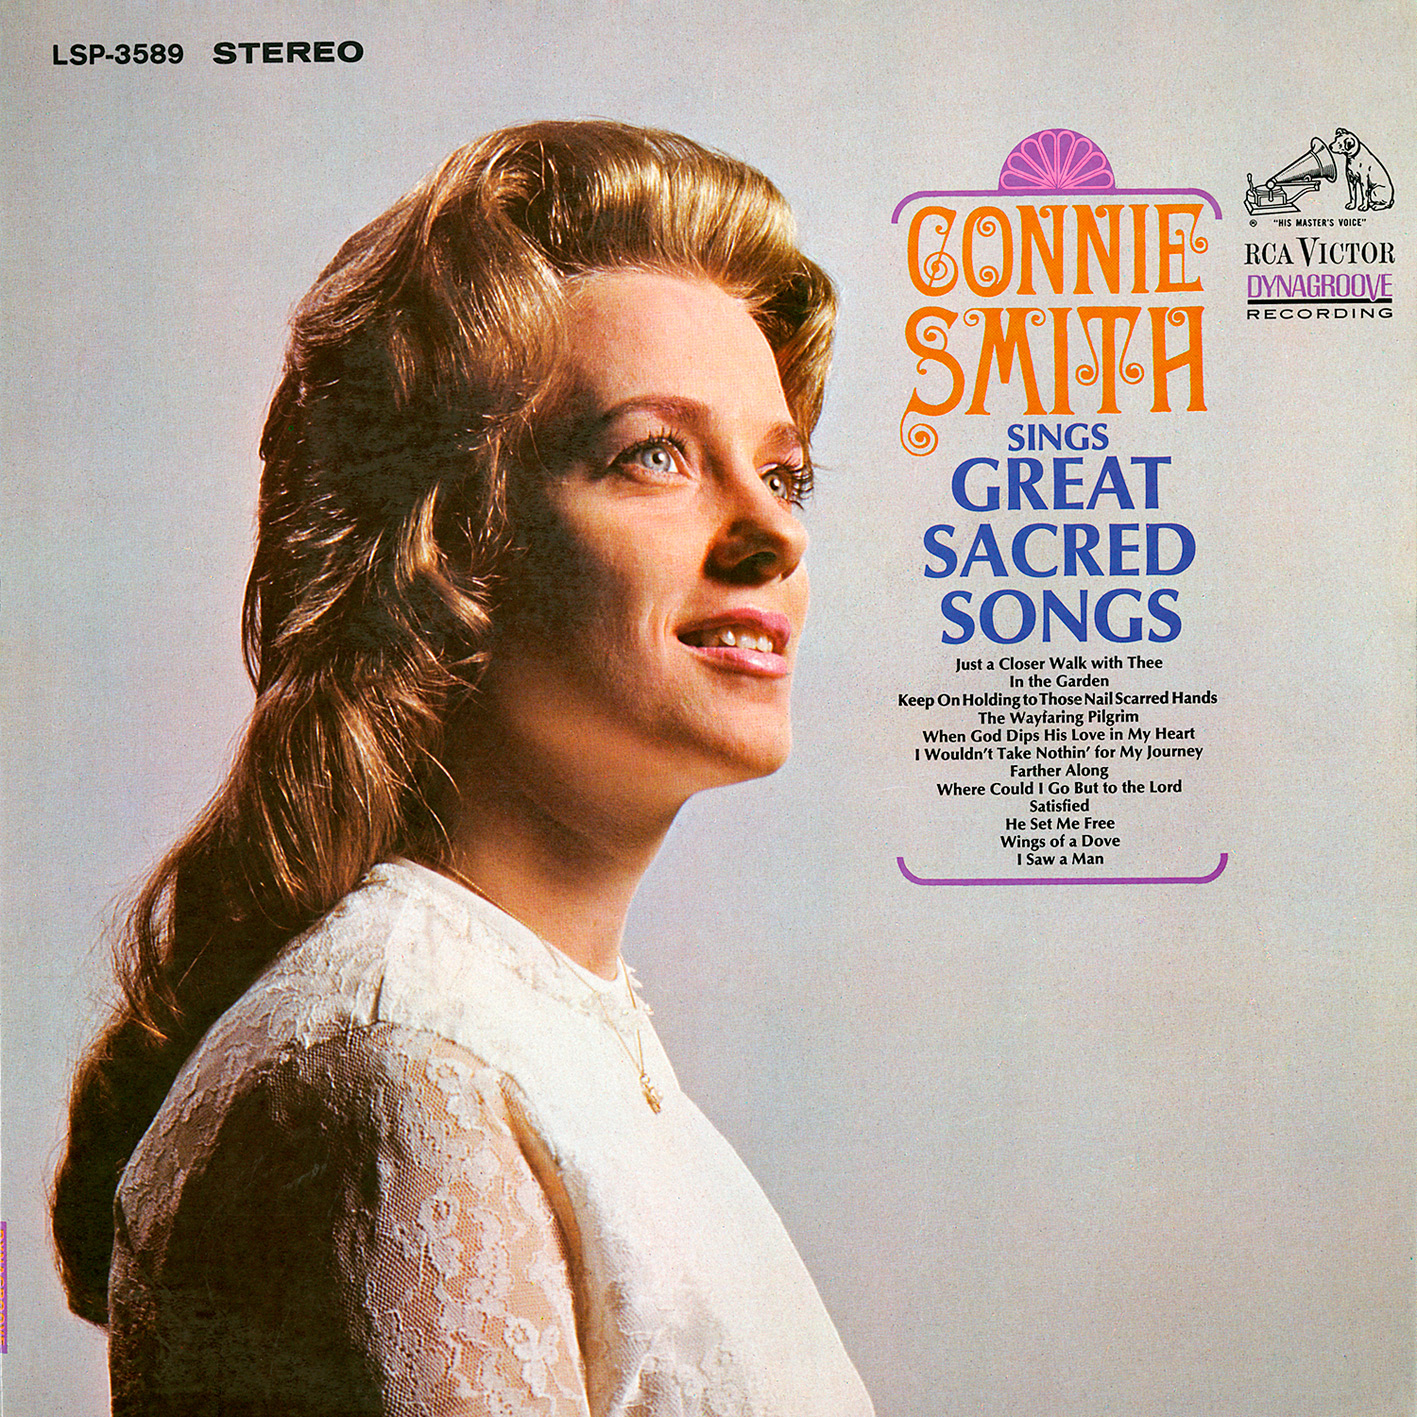 Connie Smith – Sings Great Sacred Songs (1966/2016) [AcousticSounds FLAC 24bit/192kHz]